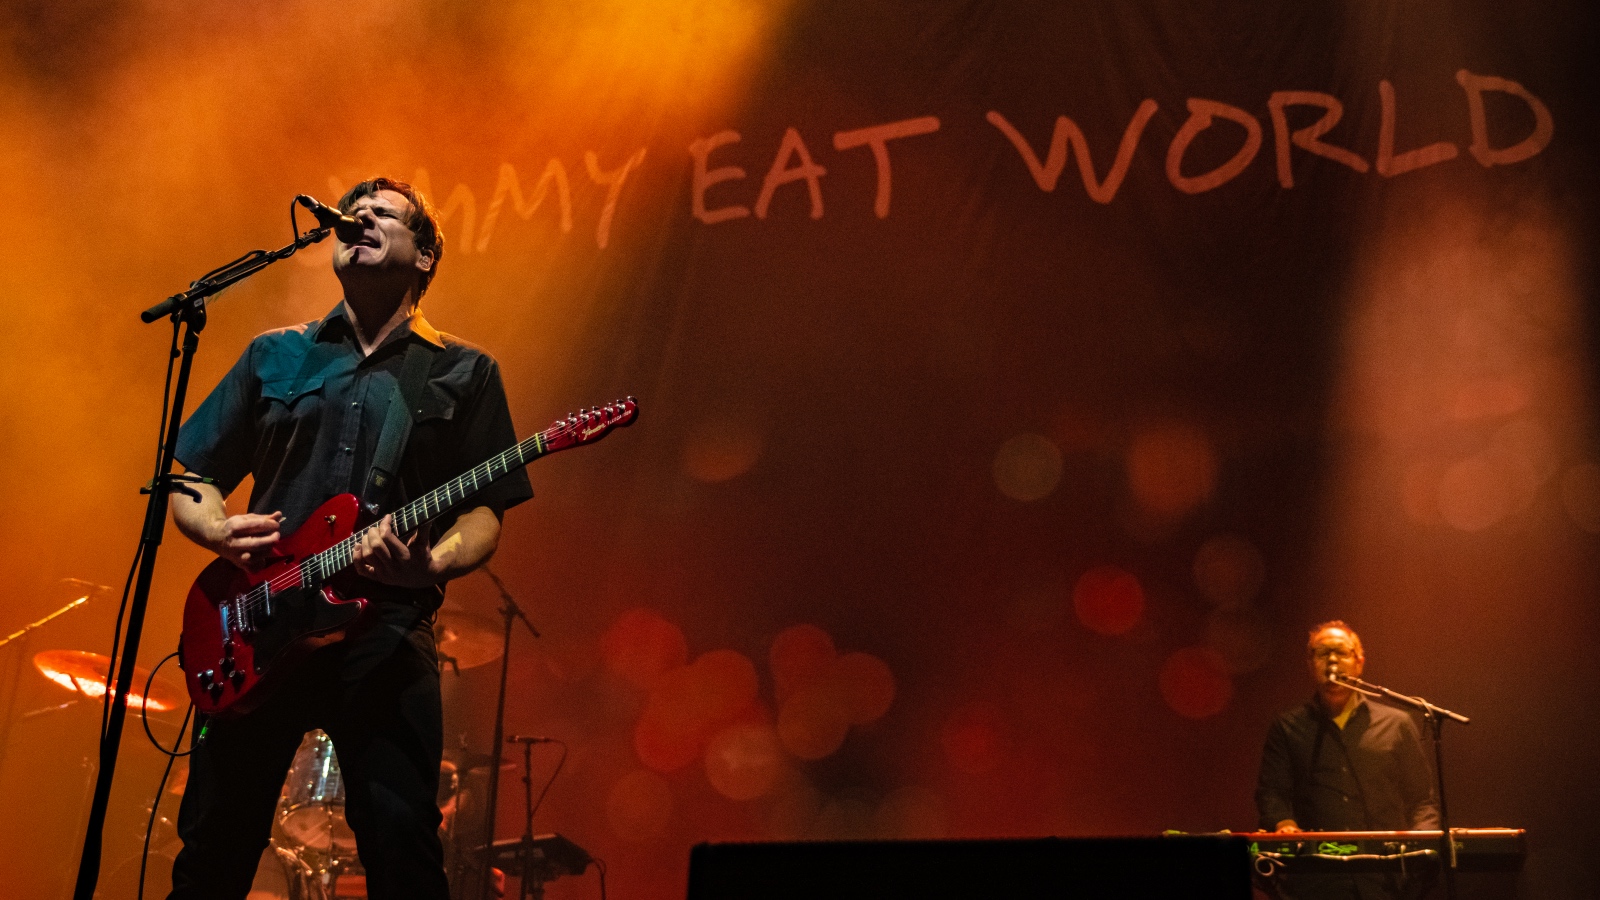 Jimmy Eat World on stage